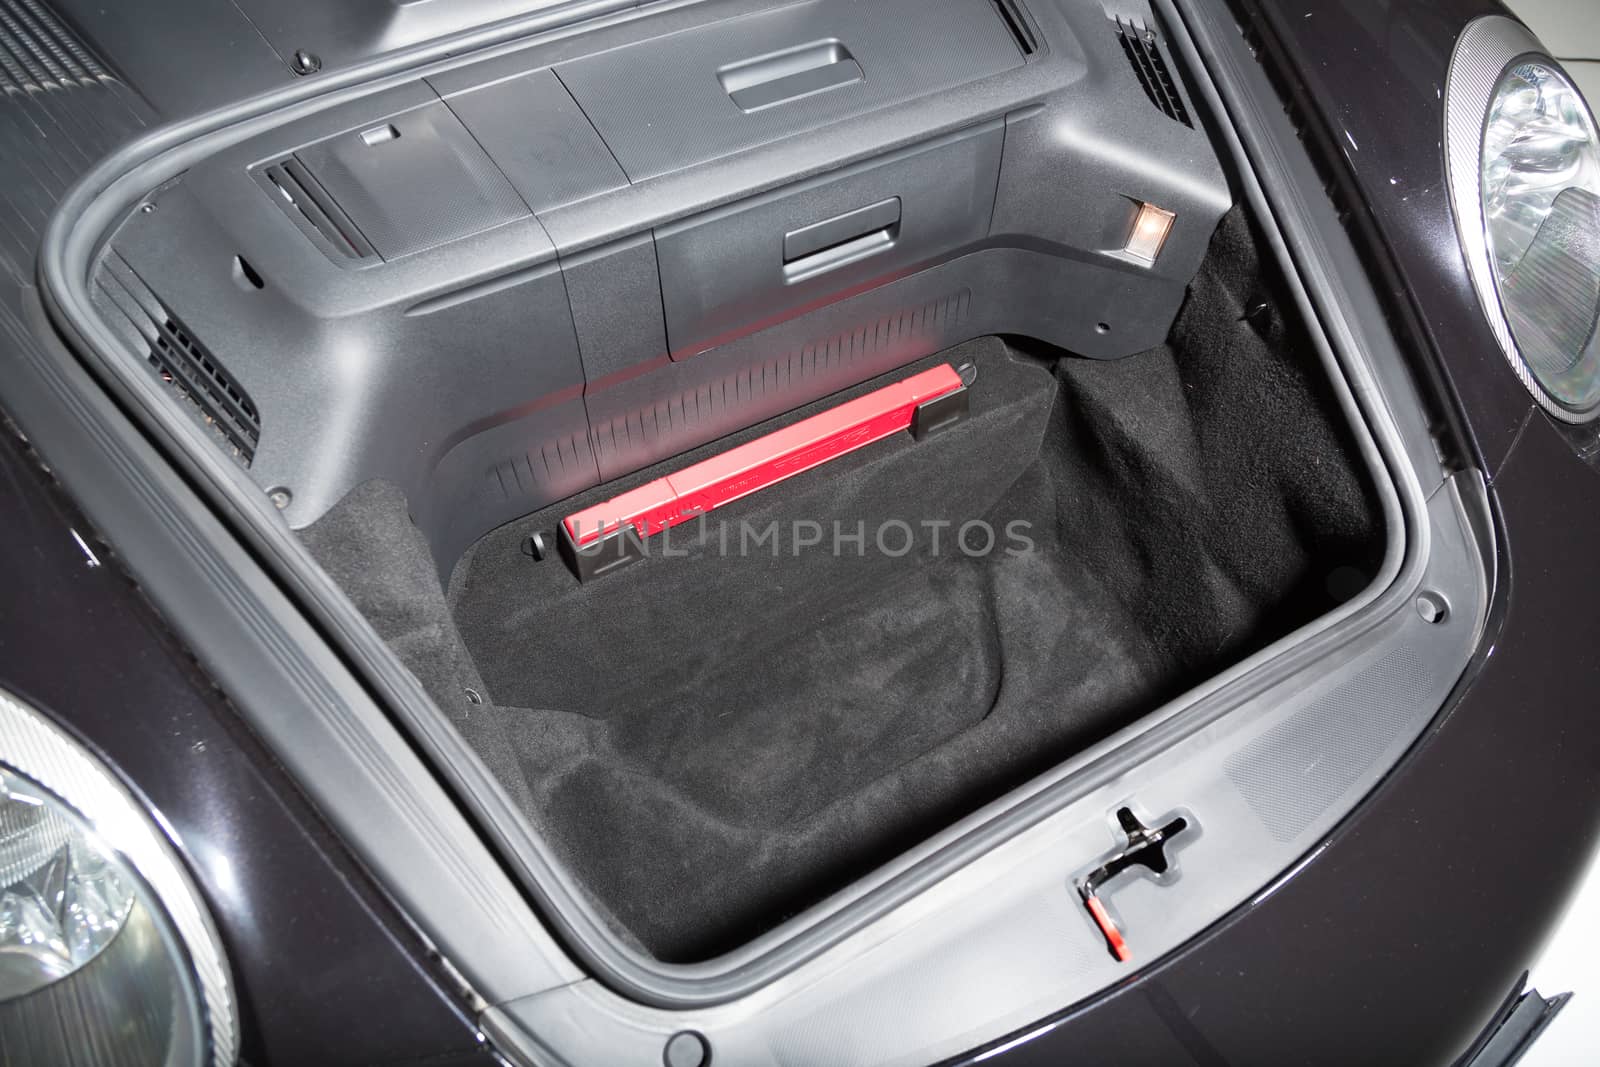 Front boot space of sports car by camerarules